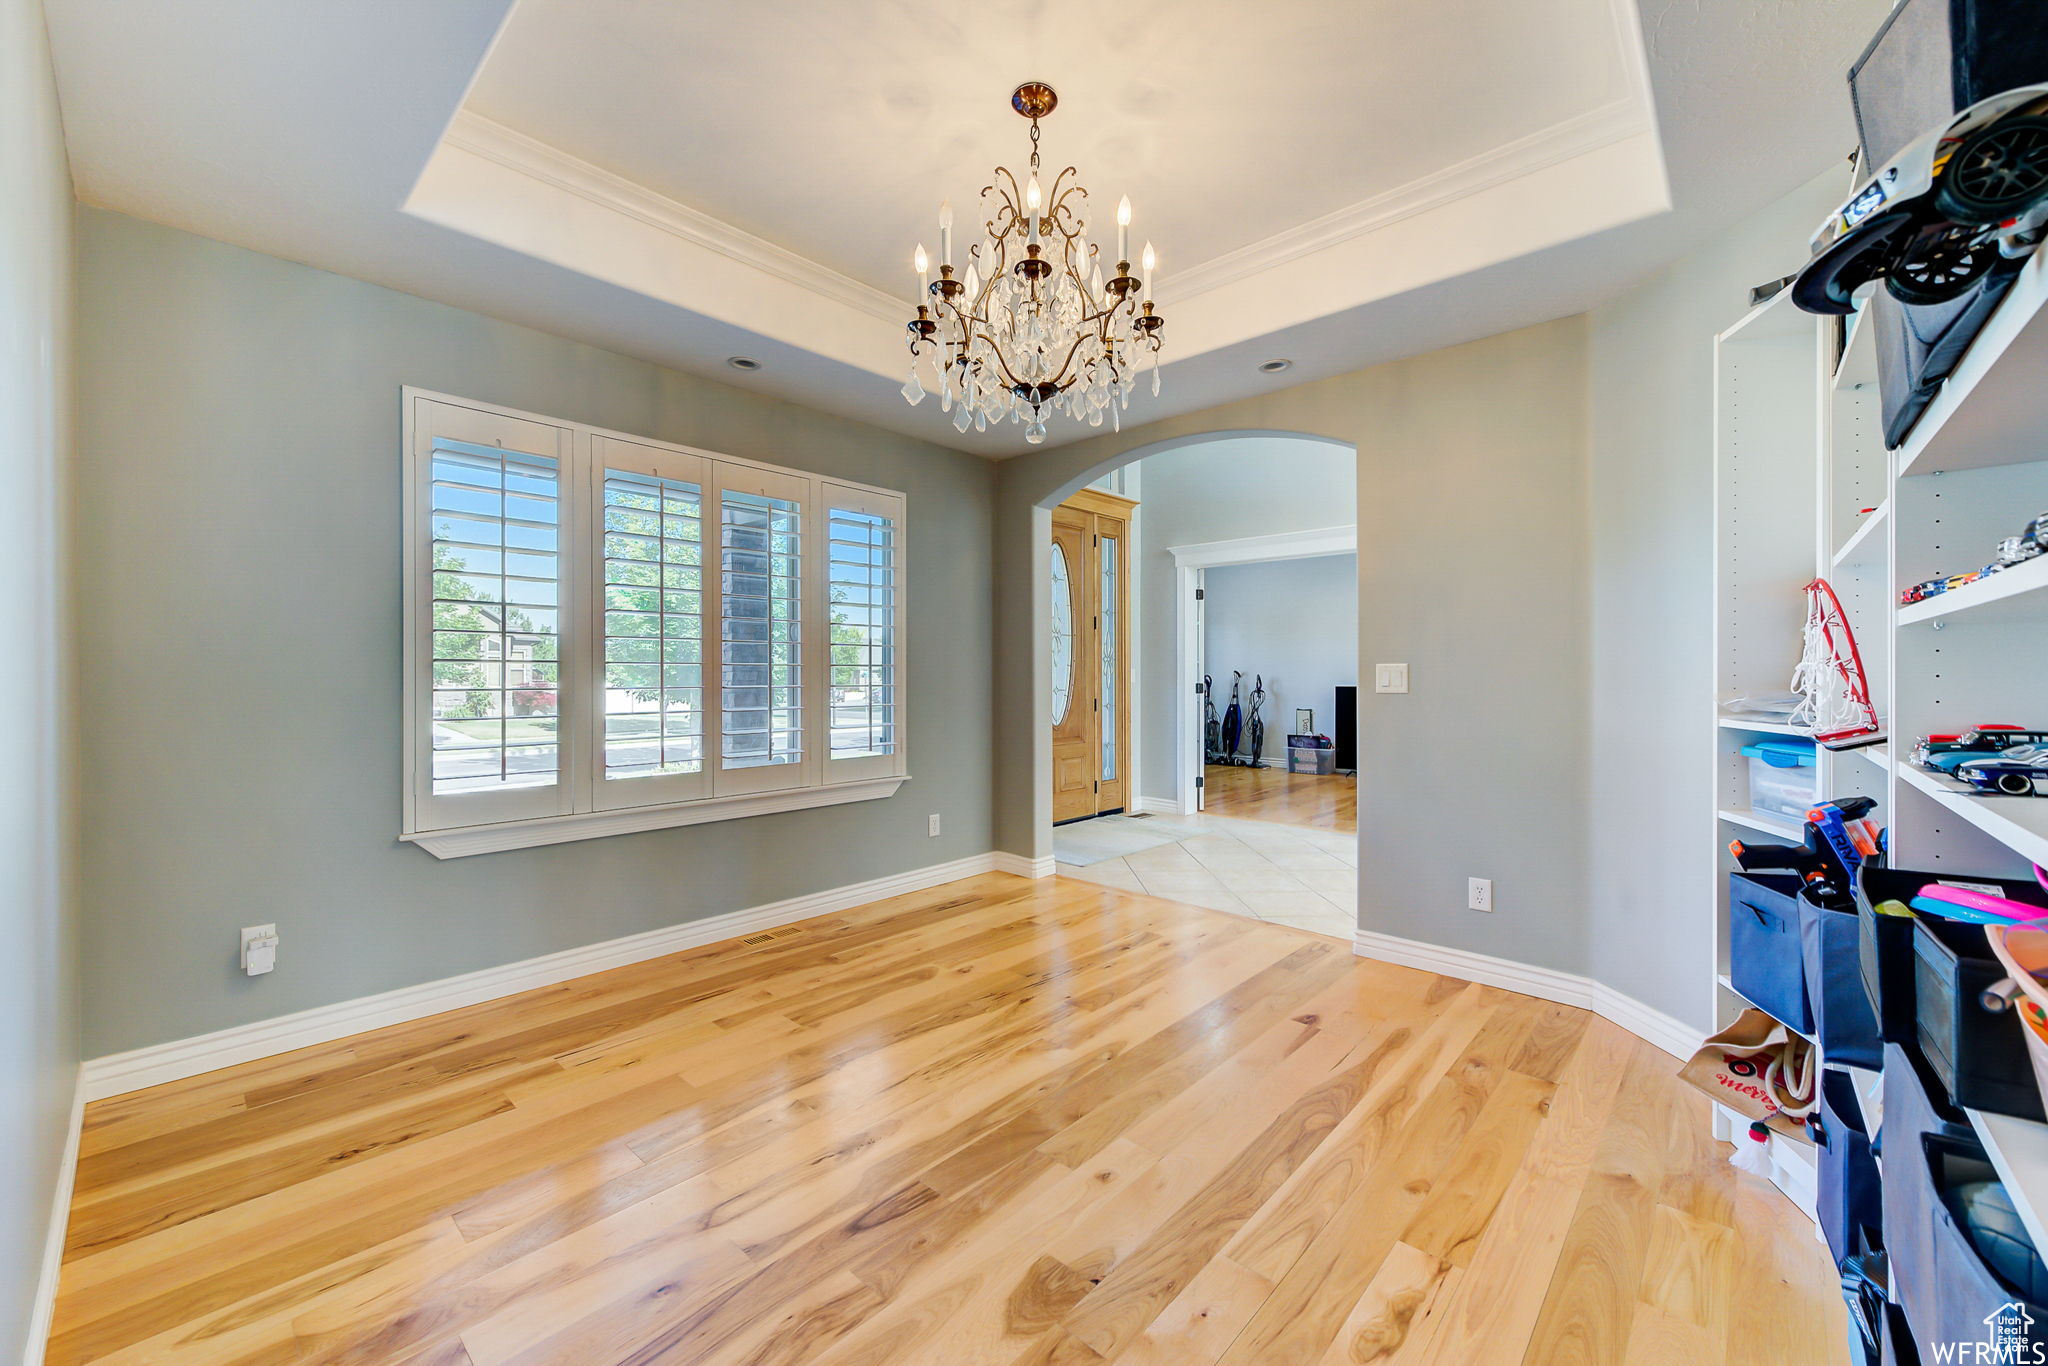 Interior space featuring a notable chandelier, light tile floors, crown molding, and a raised ceiling